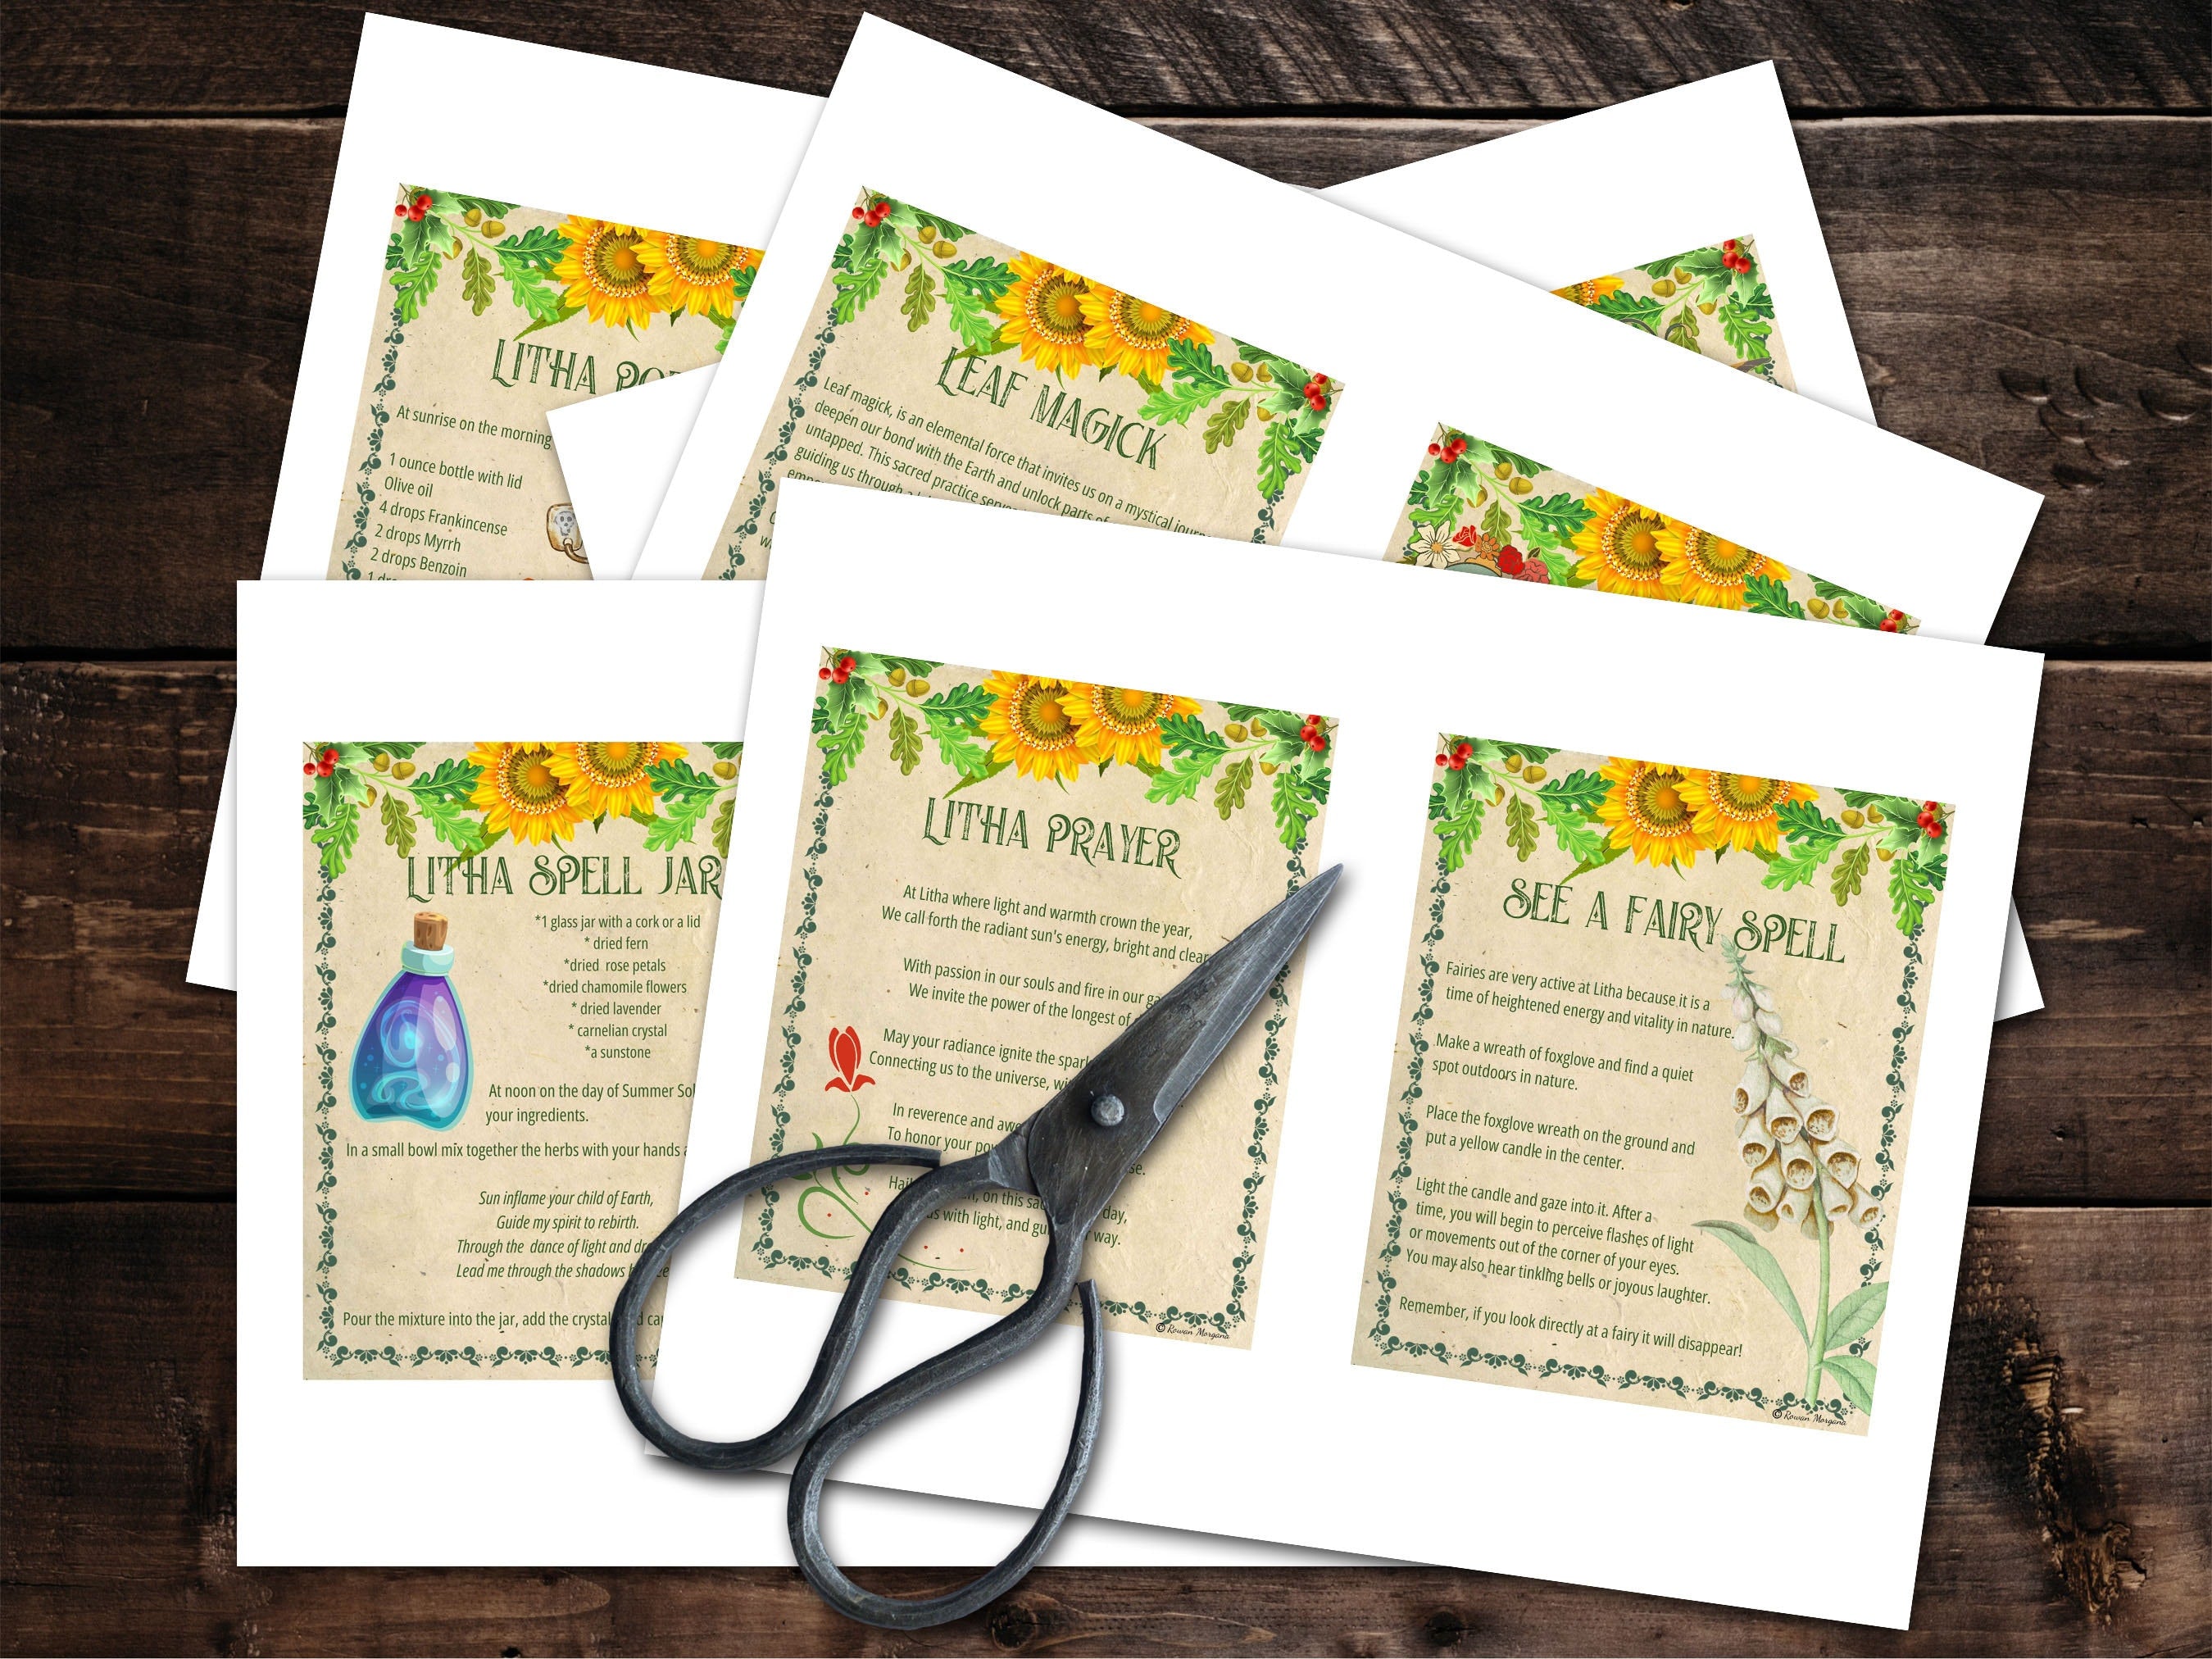 LITHA SPELL CARDS, Enchanting Spells, Unlock the Magic of Summer Solstice, 10 Printable Postcards, Wicca Sabbat Altar, Pagan Witch Gift - Morgana Magick Spell